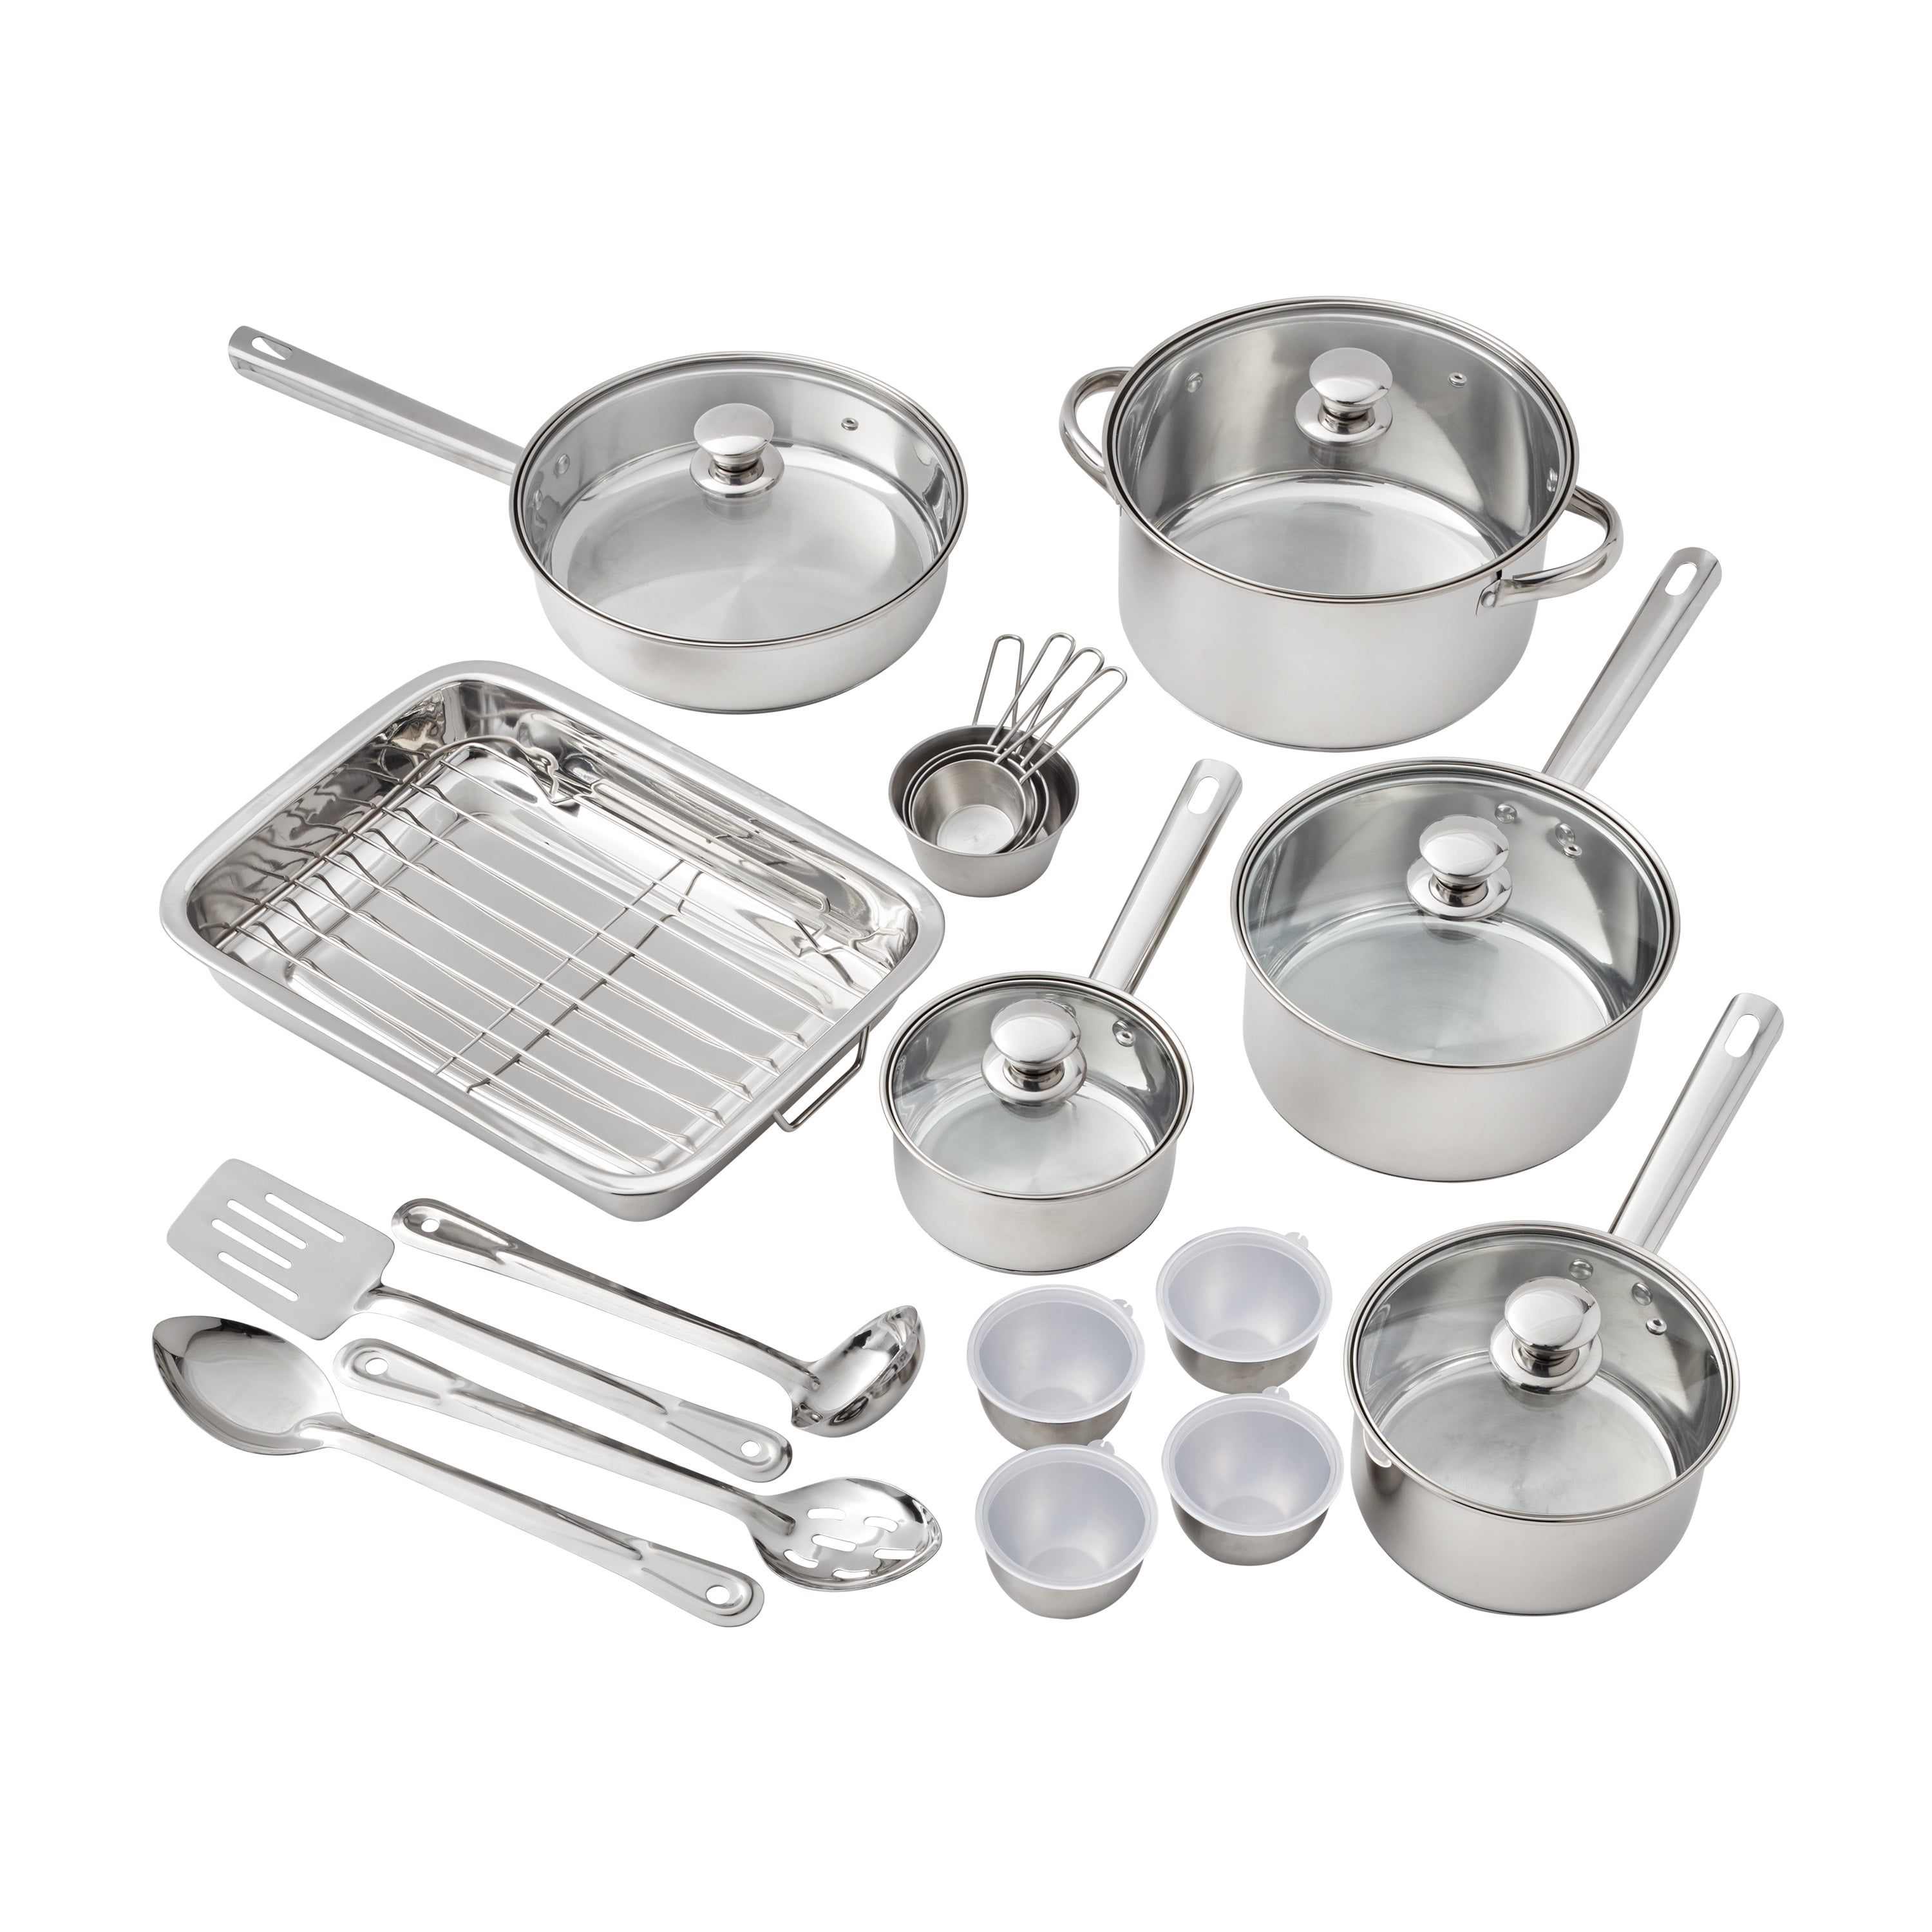 83-Piece Complete Kitchen Set Starter Kit Cookware Place Setting Utensils Cook 